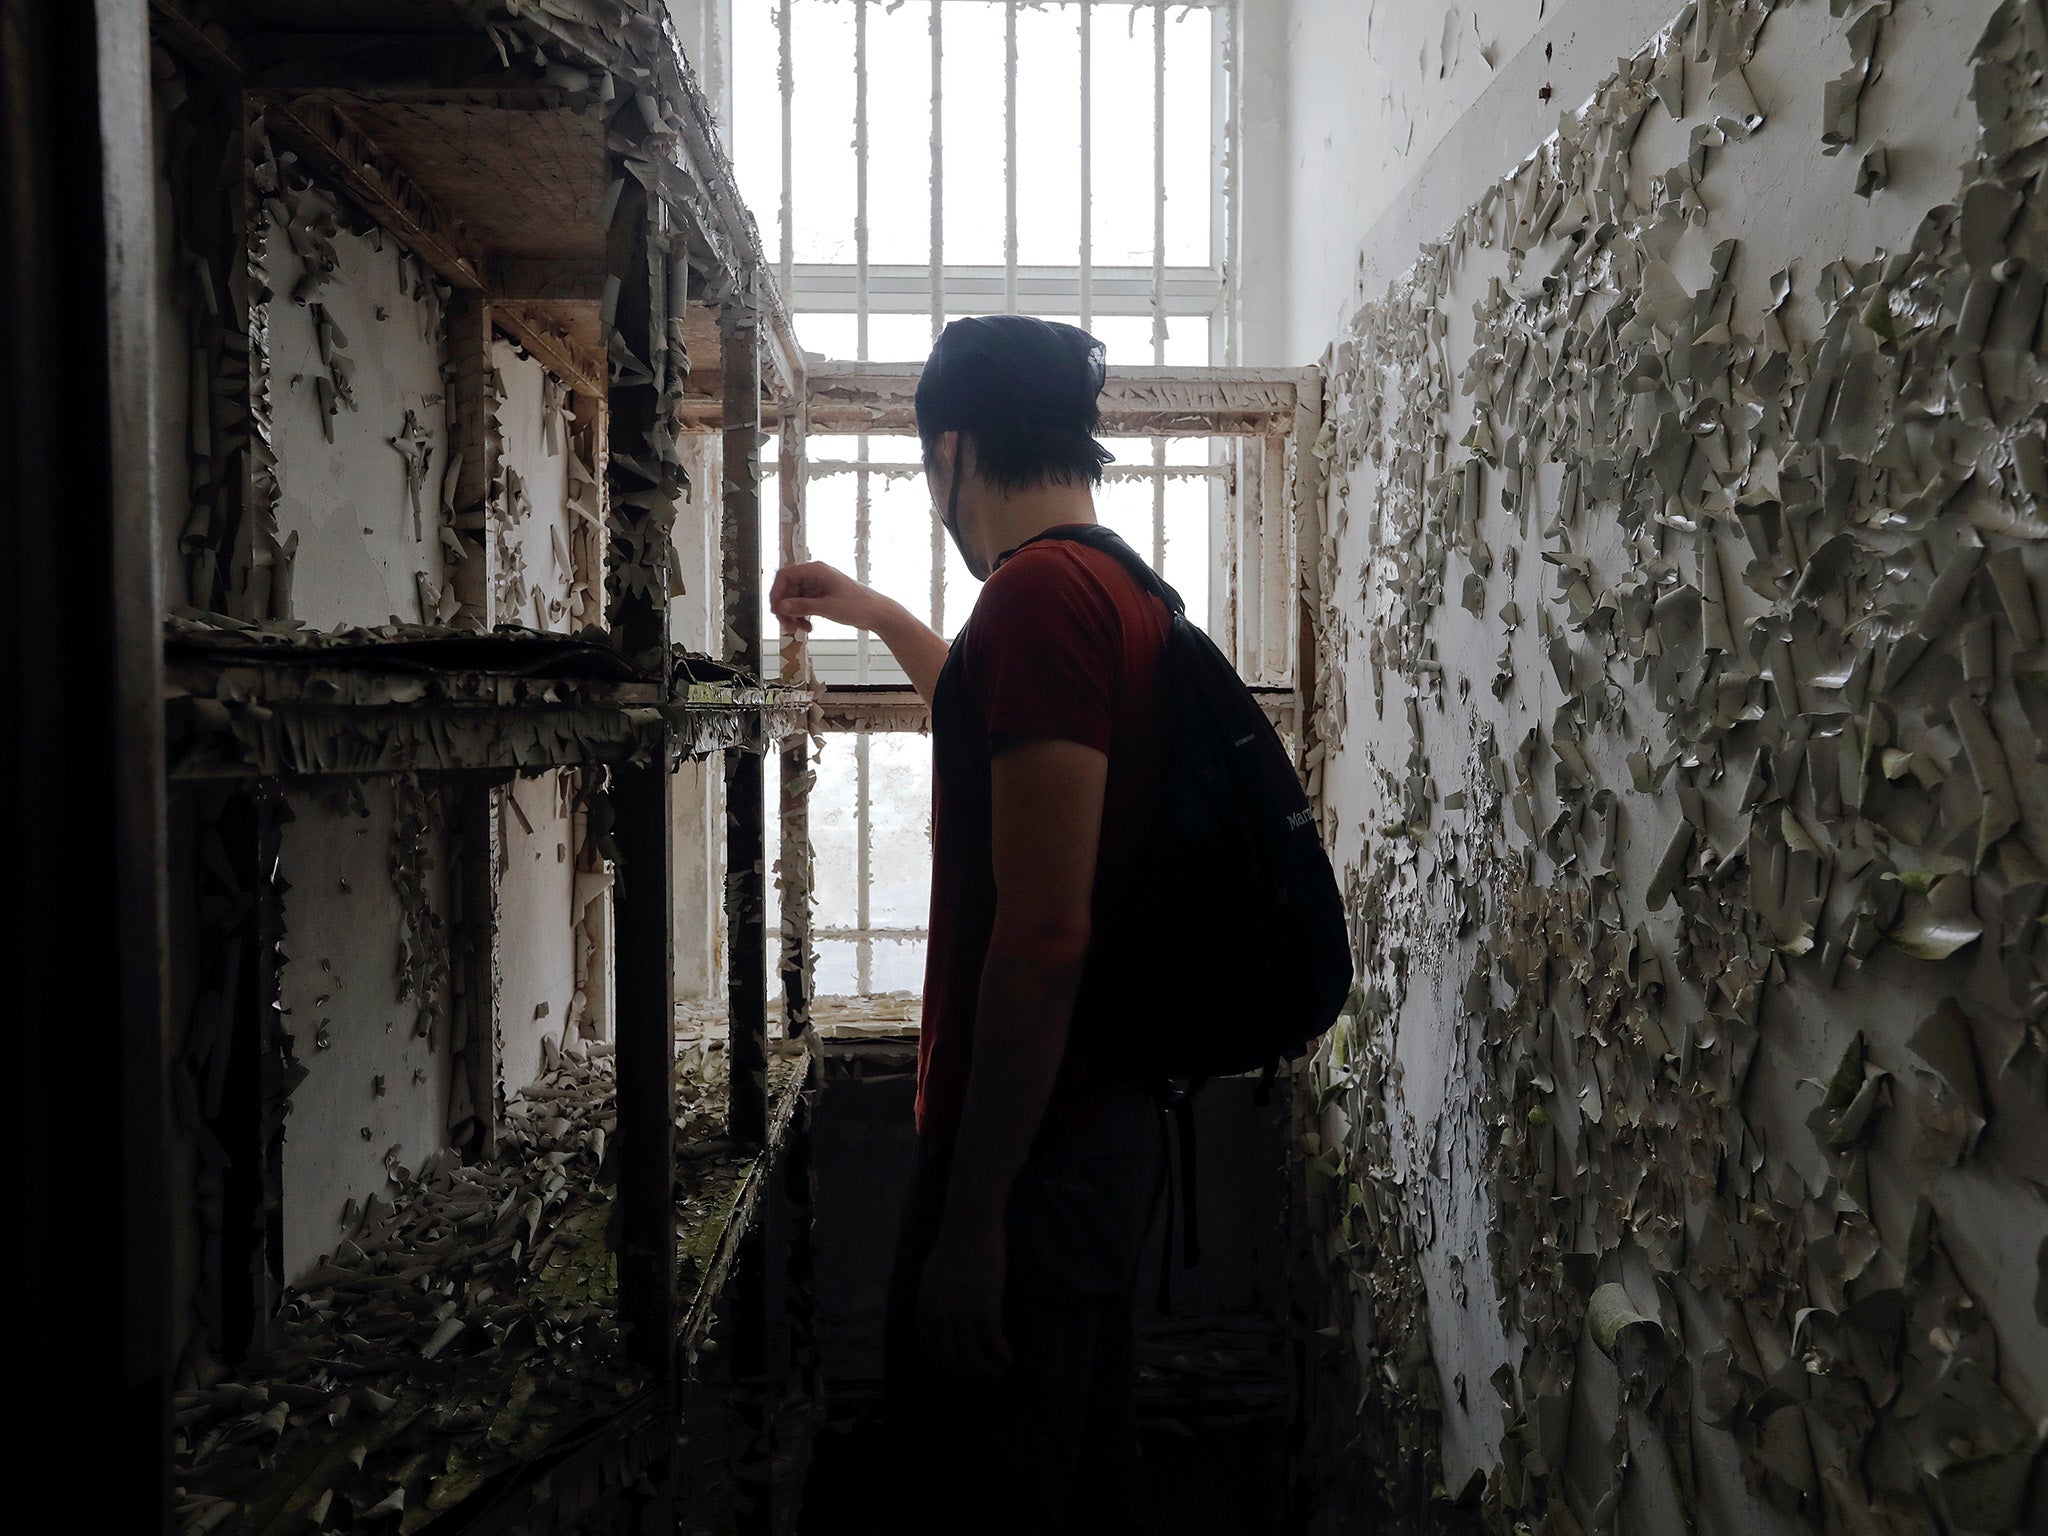 A member of HK URBEX inspects the interior of an abandoned British army barracks in Hong Kong